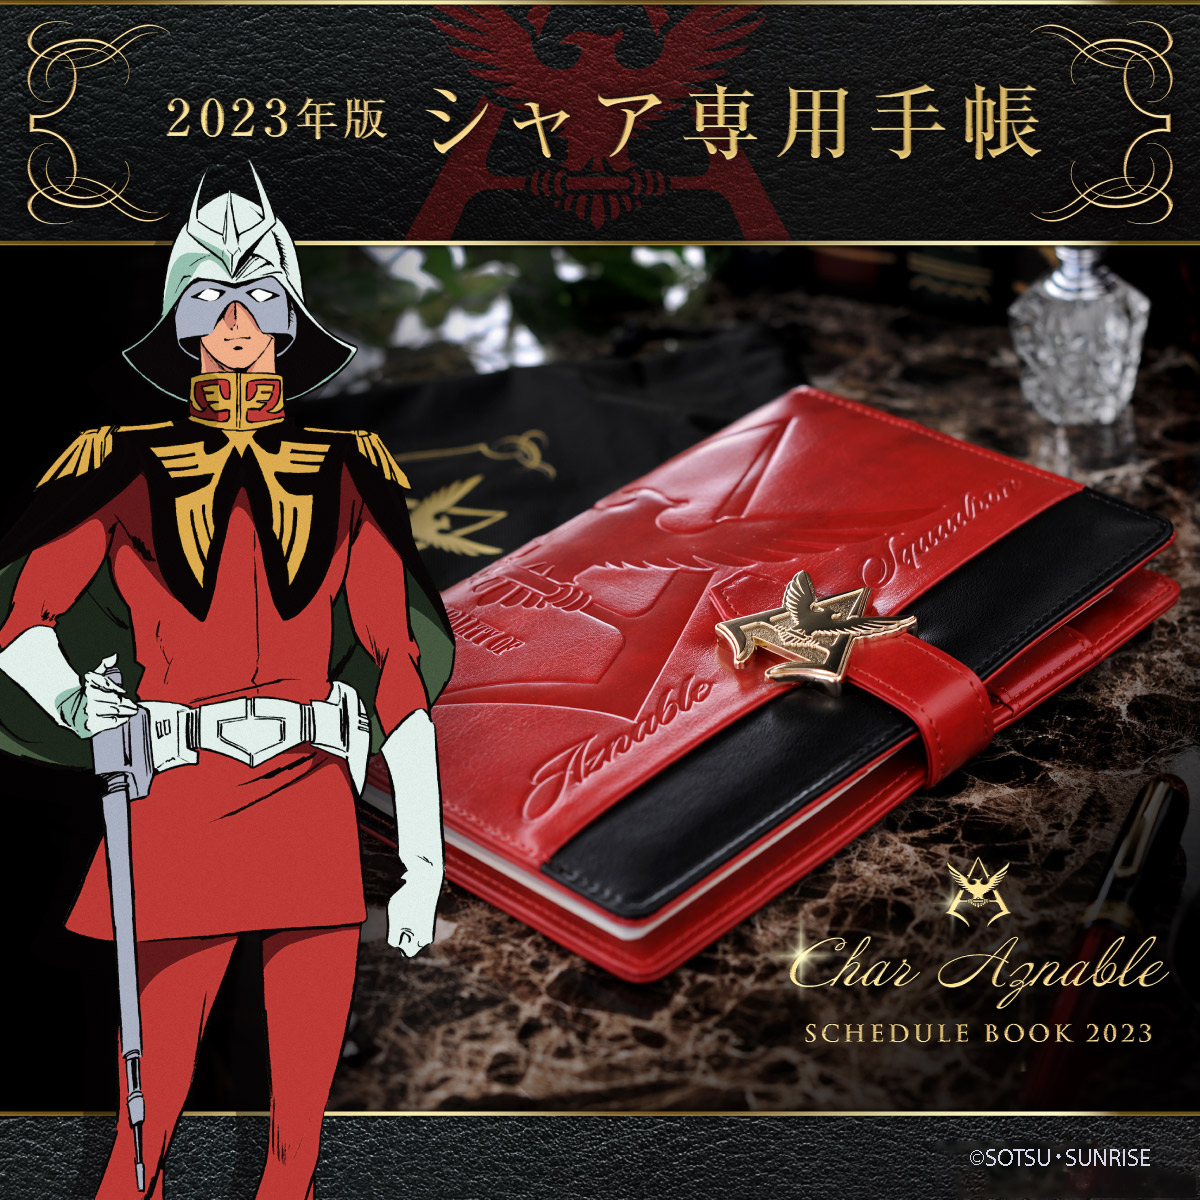 MOBILE SUIT GUNDAM CHAR'S SCHEDULE BOOK 2023 [Jan 2023 Delivery]